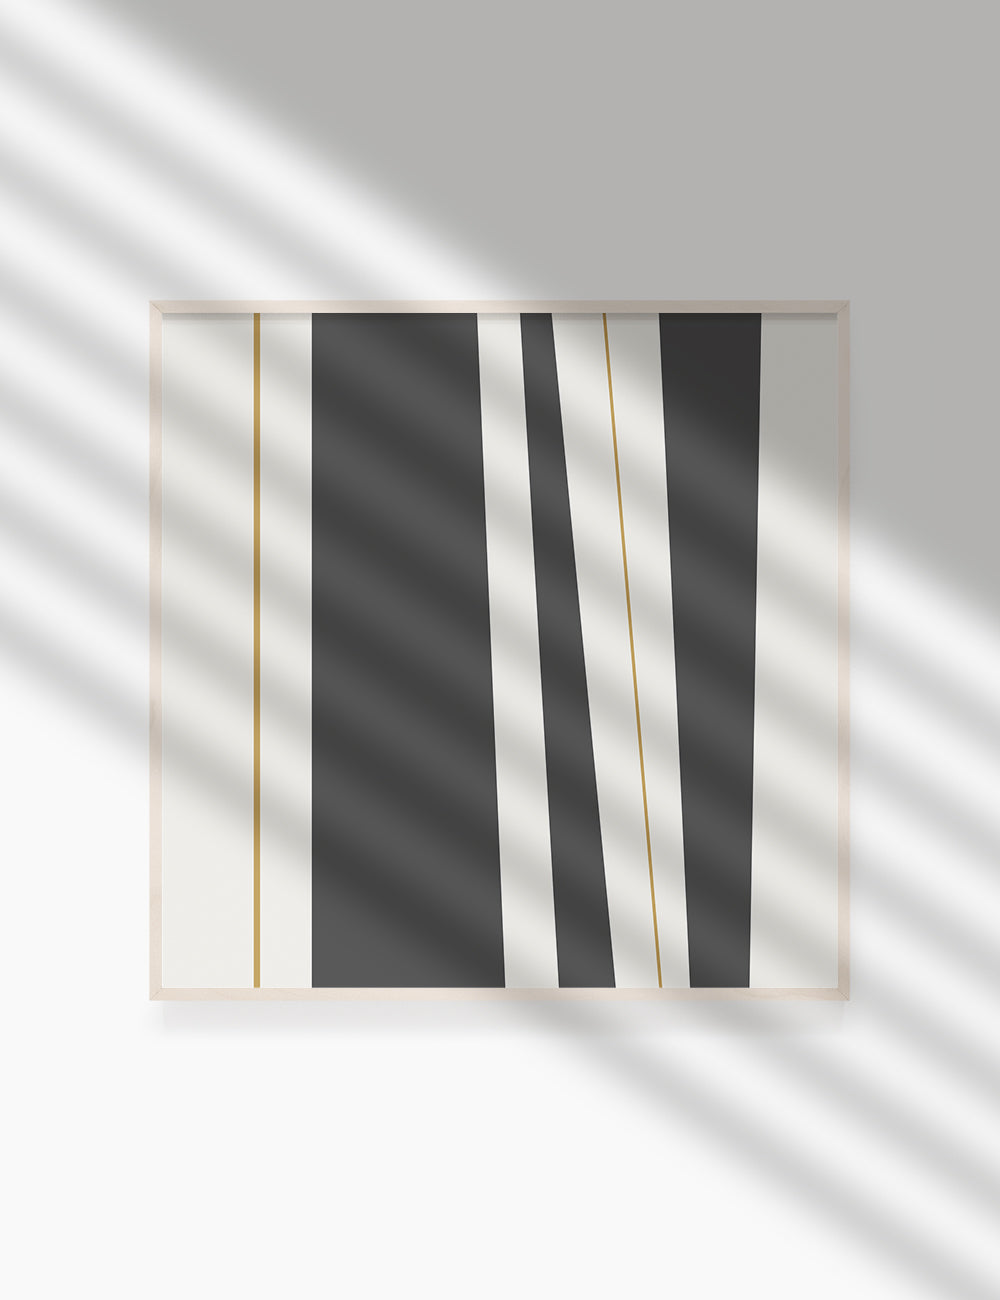 ABSTRACT MINIMAL LINES AND STRIPES. Printable Wall Art Illustration. Stripes and lines in dark grey, dull orange, and beige. Abstract art. Minimal design. Geometric print. Minimalist, abstract illustration art. Printable poster. | PAPER MOON Art & Design